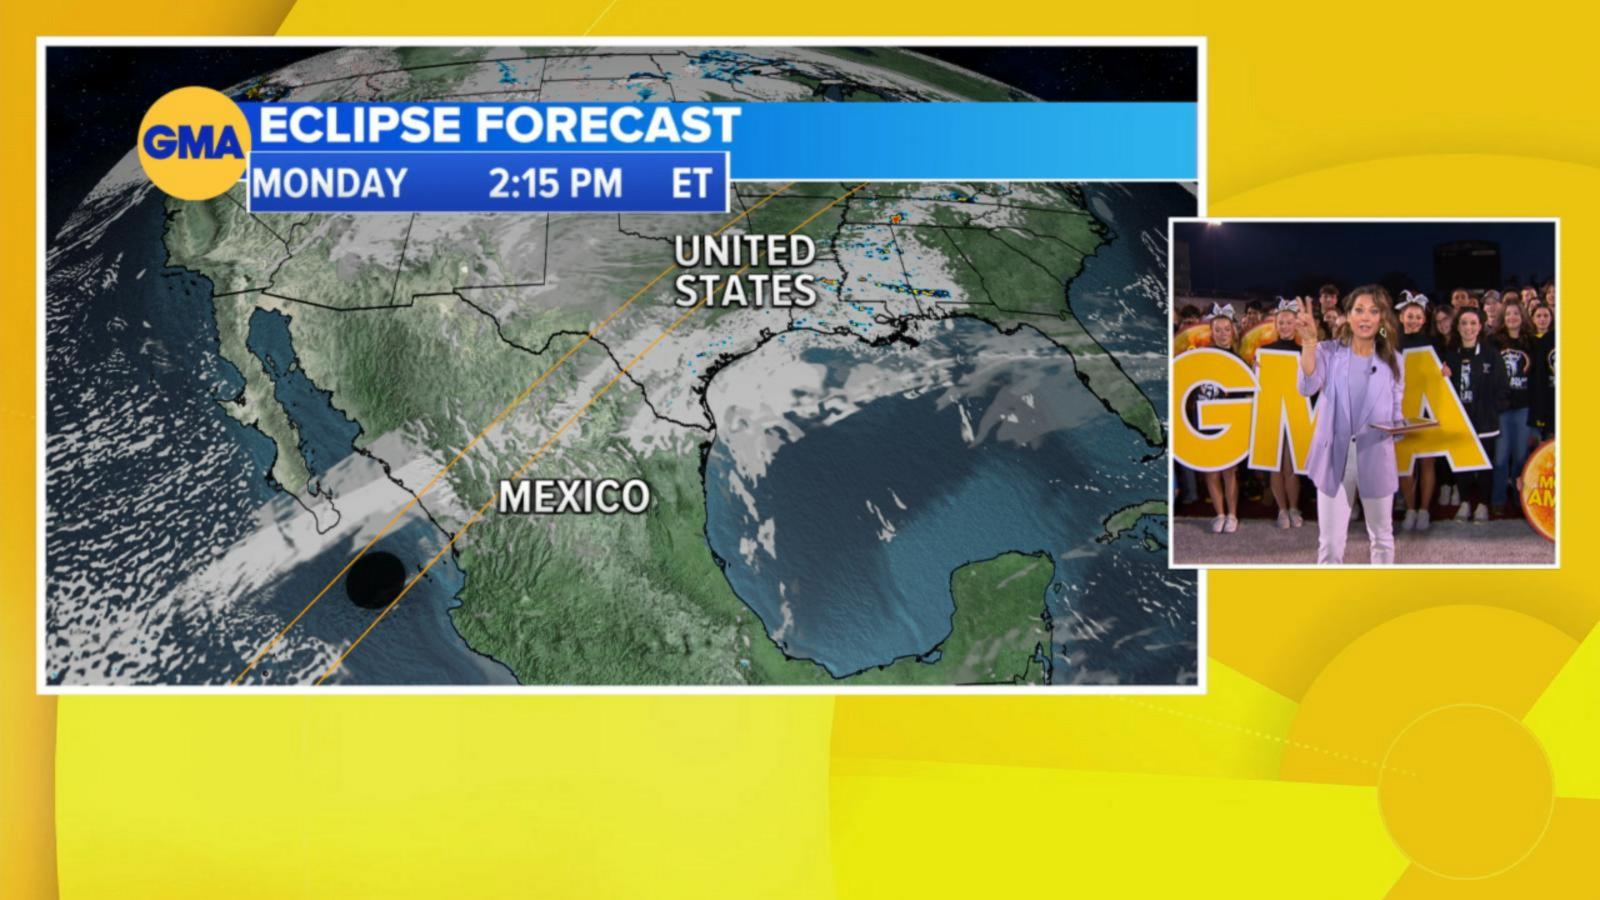 VIDEO: What the forecast looks like for solar eclipse